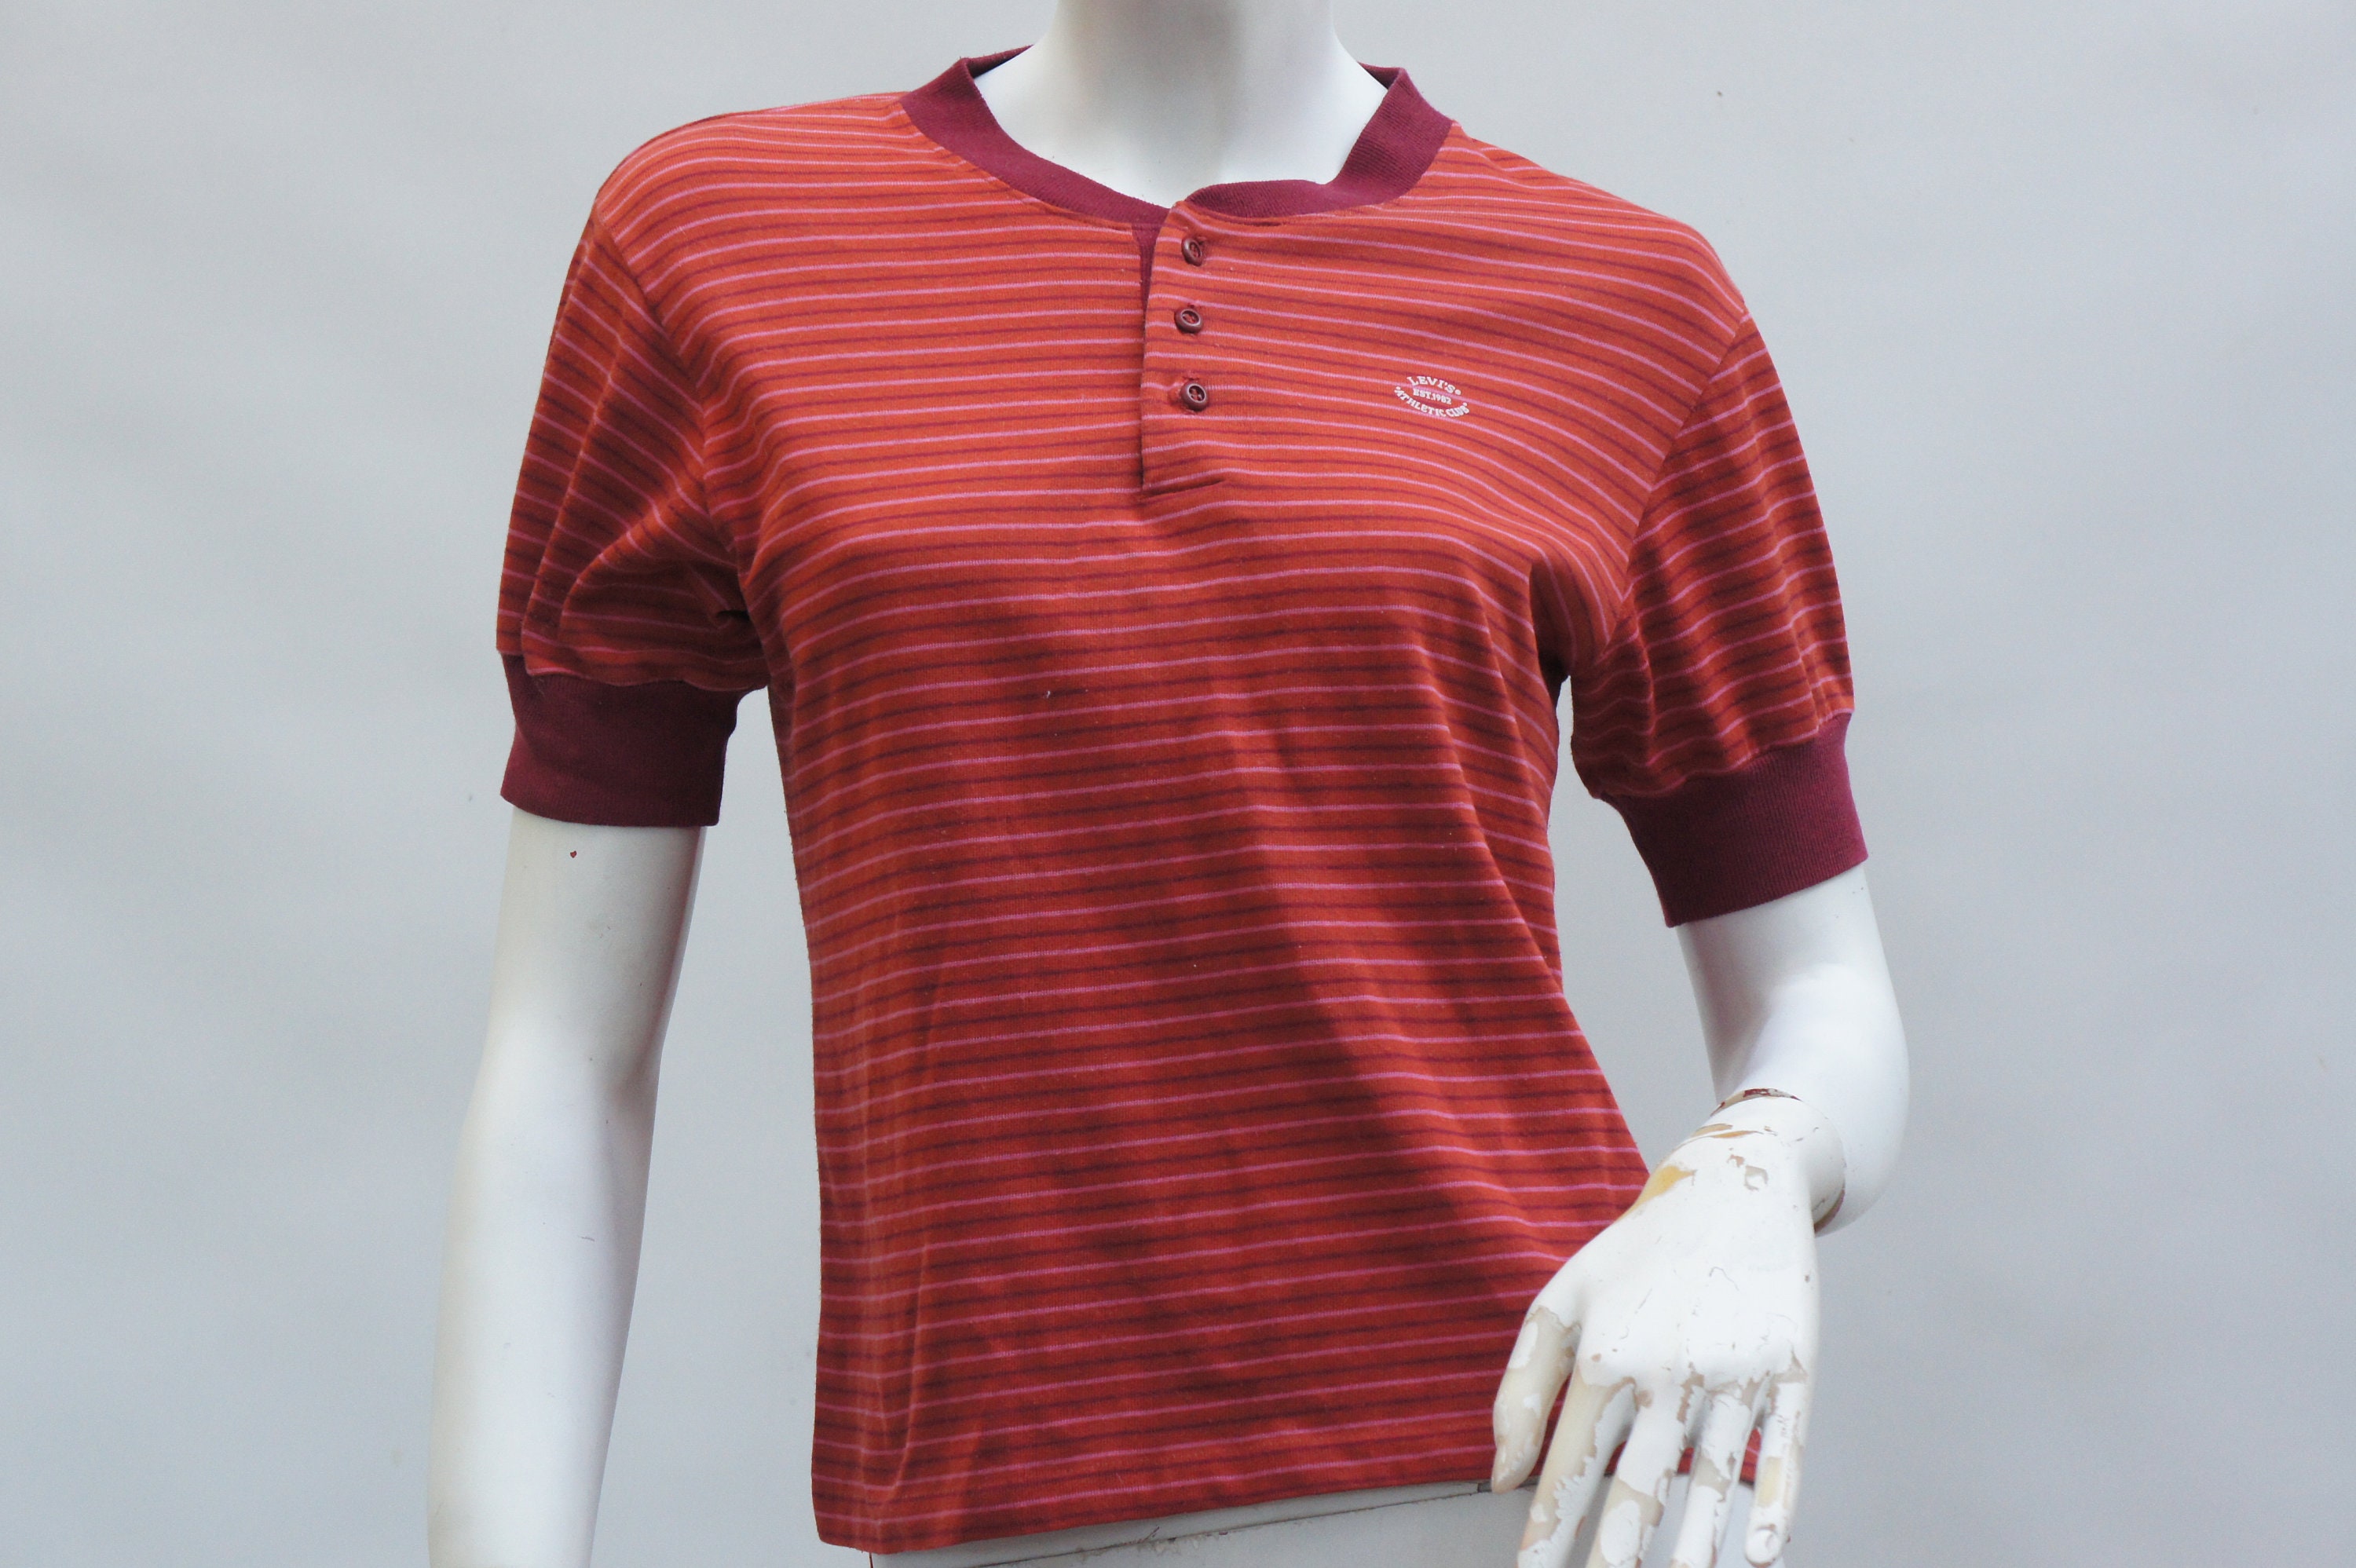 Levis Vintage Clothing LVC 1920s Red Umber Stripe Henley Tshirt £179 New  USA S